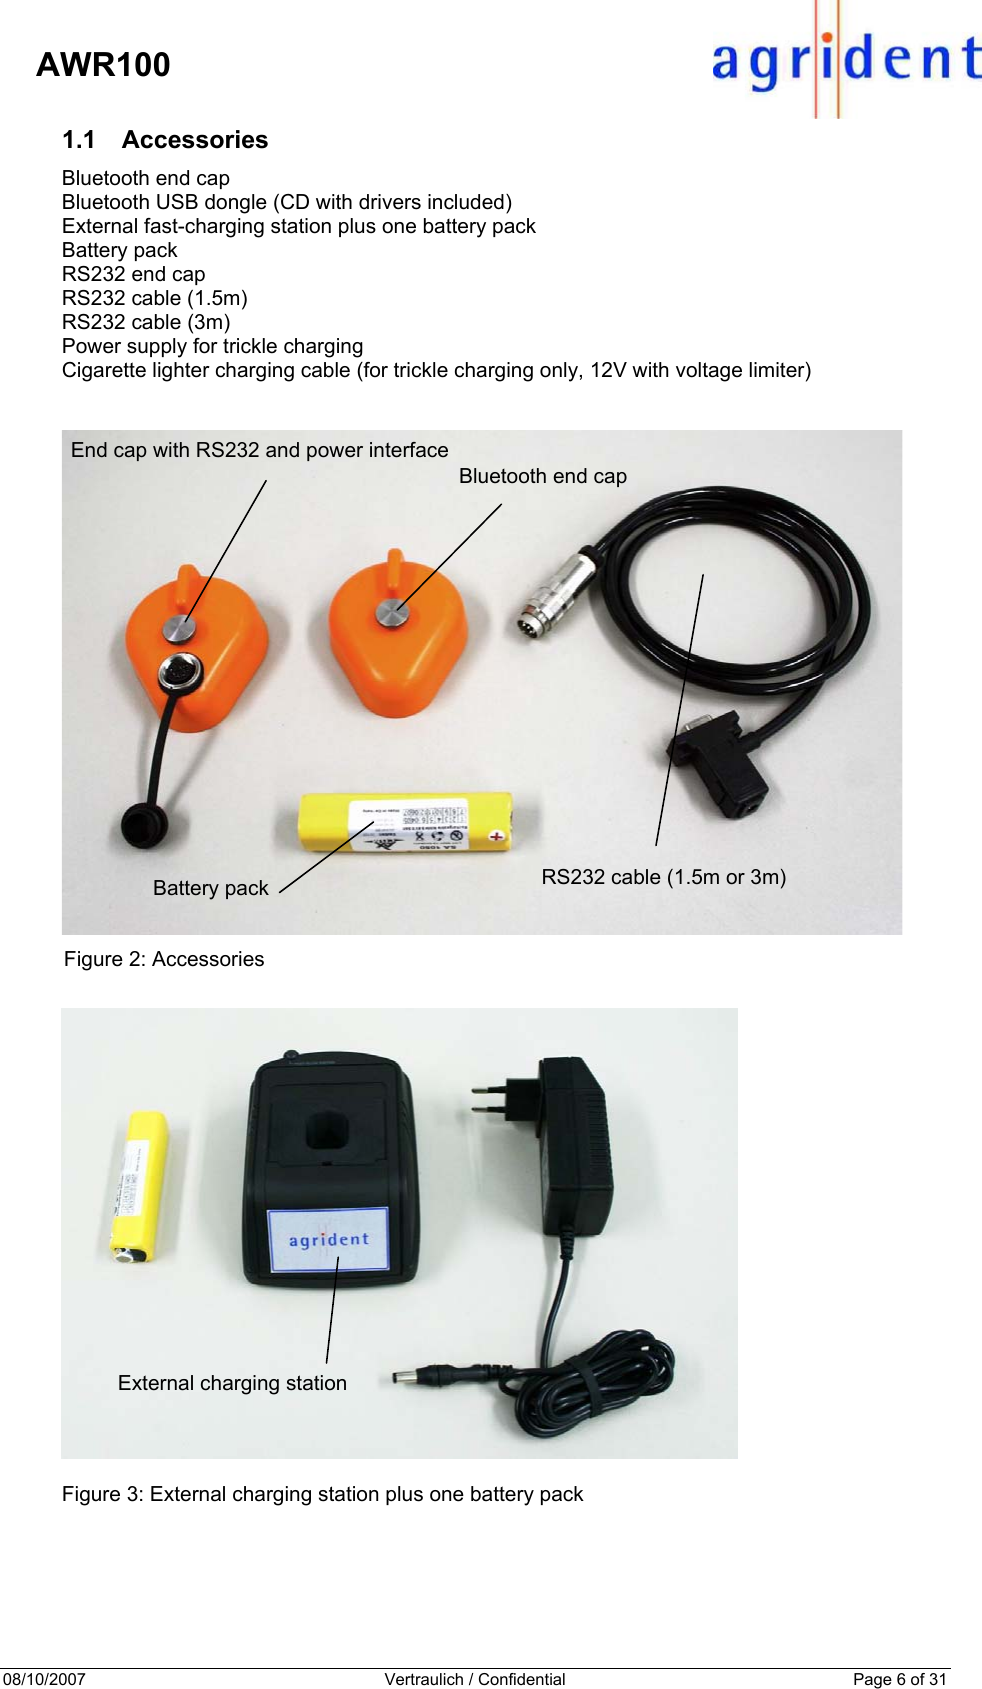 08/10/2007  Vertraulich / Confidential  Page 6 of 31     AWR100 1.1 Accessories Bluetooth end cap Bluetooth USB dongle (CD with drivers included) External fast-charging station plus one battery pack Battery pack RS232 end cap RS232 cable (1.5m) RS232 cable (3m) Power supply for trickle charging Cigarette lighter charging cable (for trickle charging only, 12V with voltage limiter)    Figure 2: Accessories    Figure 3: External charging station plus one battery pack  End cap with RS232 and power interface Battery pack Bluetooth end cap RS232 cable (1.5m or 3m) External charging station 